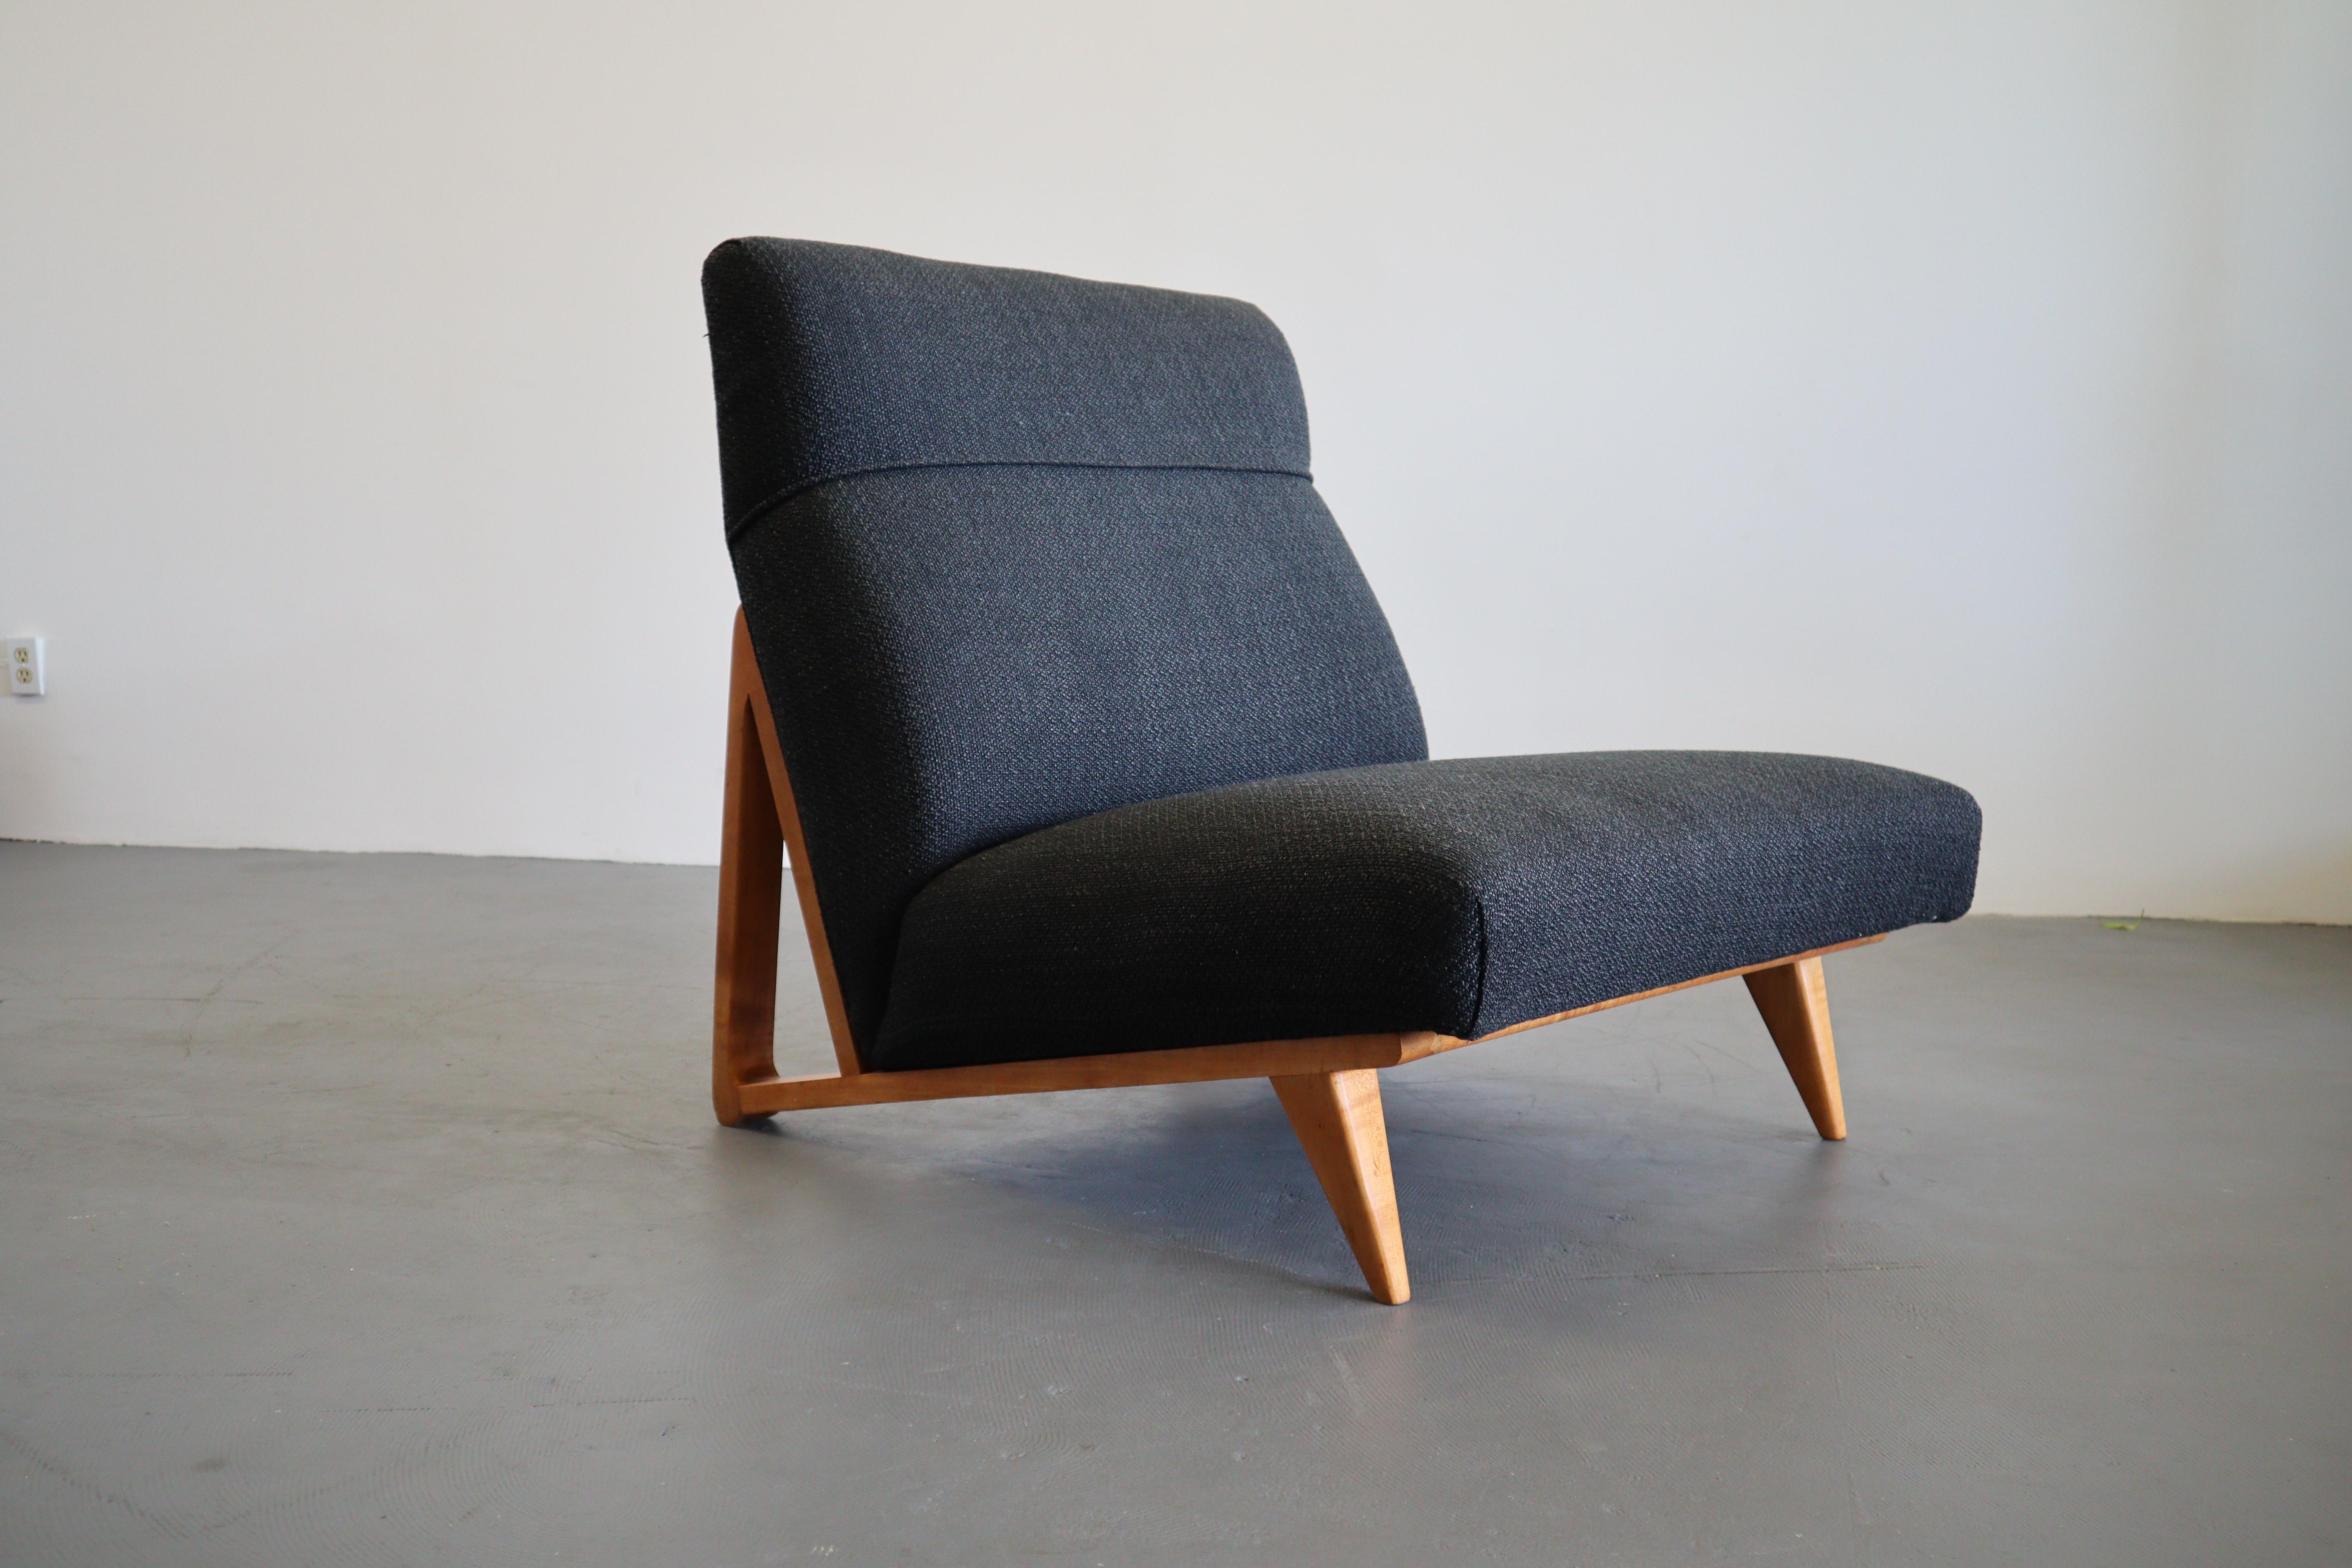 A very unique and possibly one off 1950s lounge chair in solid maple and new upholstery.  It is reminiscent of several great designs by Jens Risom, Edward Wormley and Hans Wegner.  It is very well constructed and sits wide and deep for a low lounge